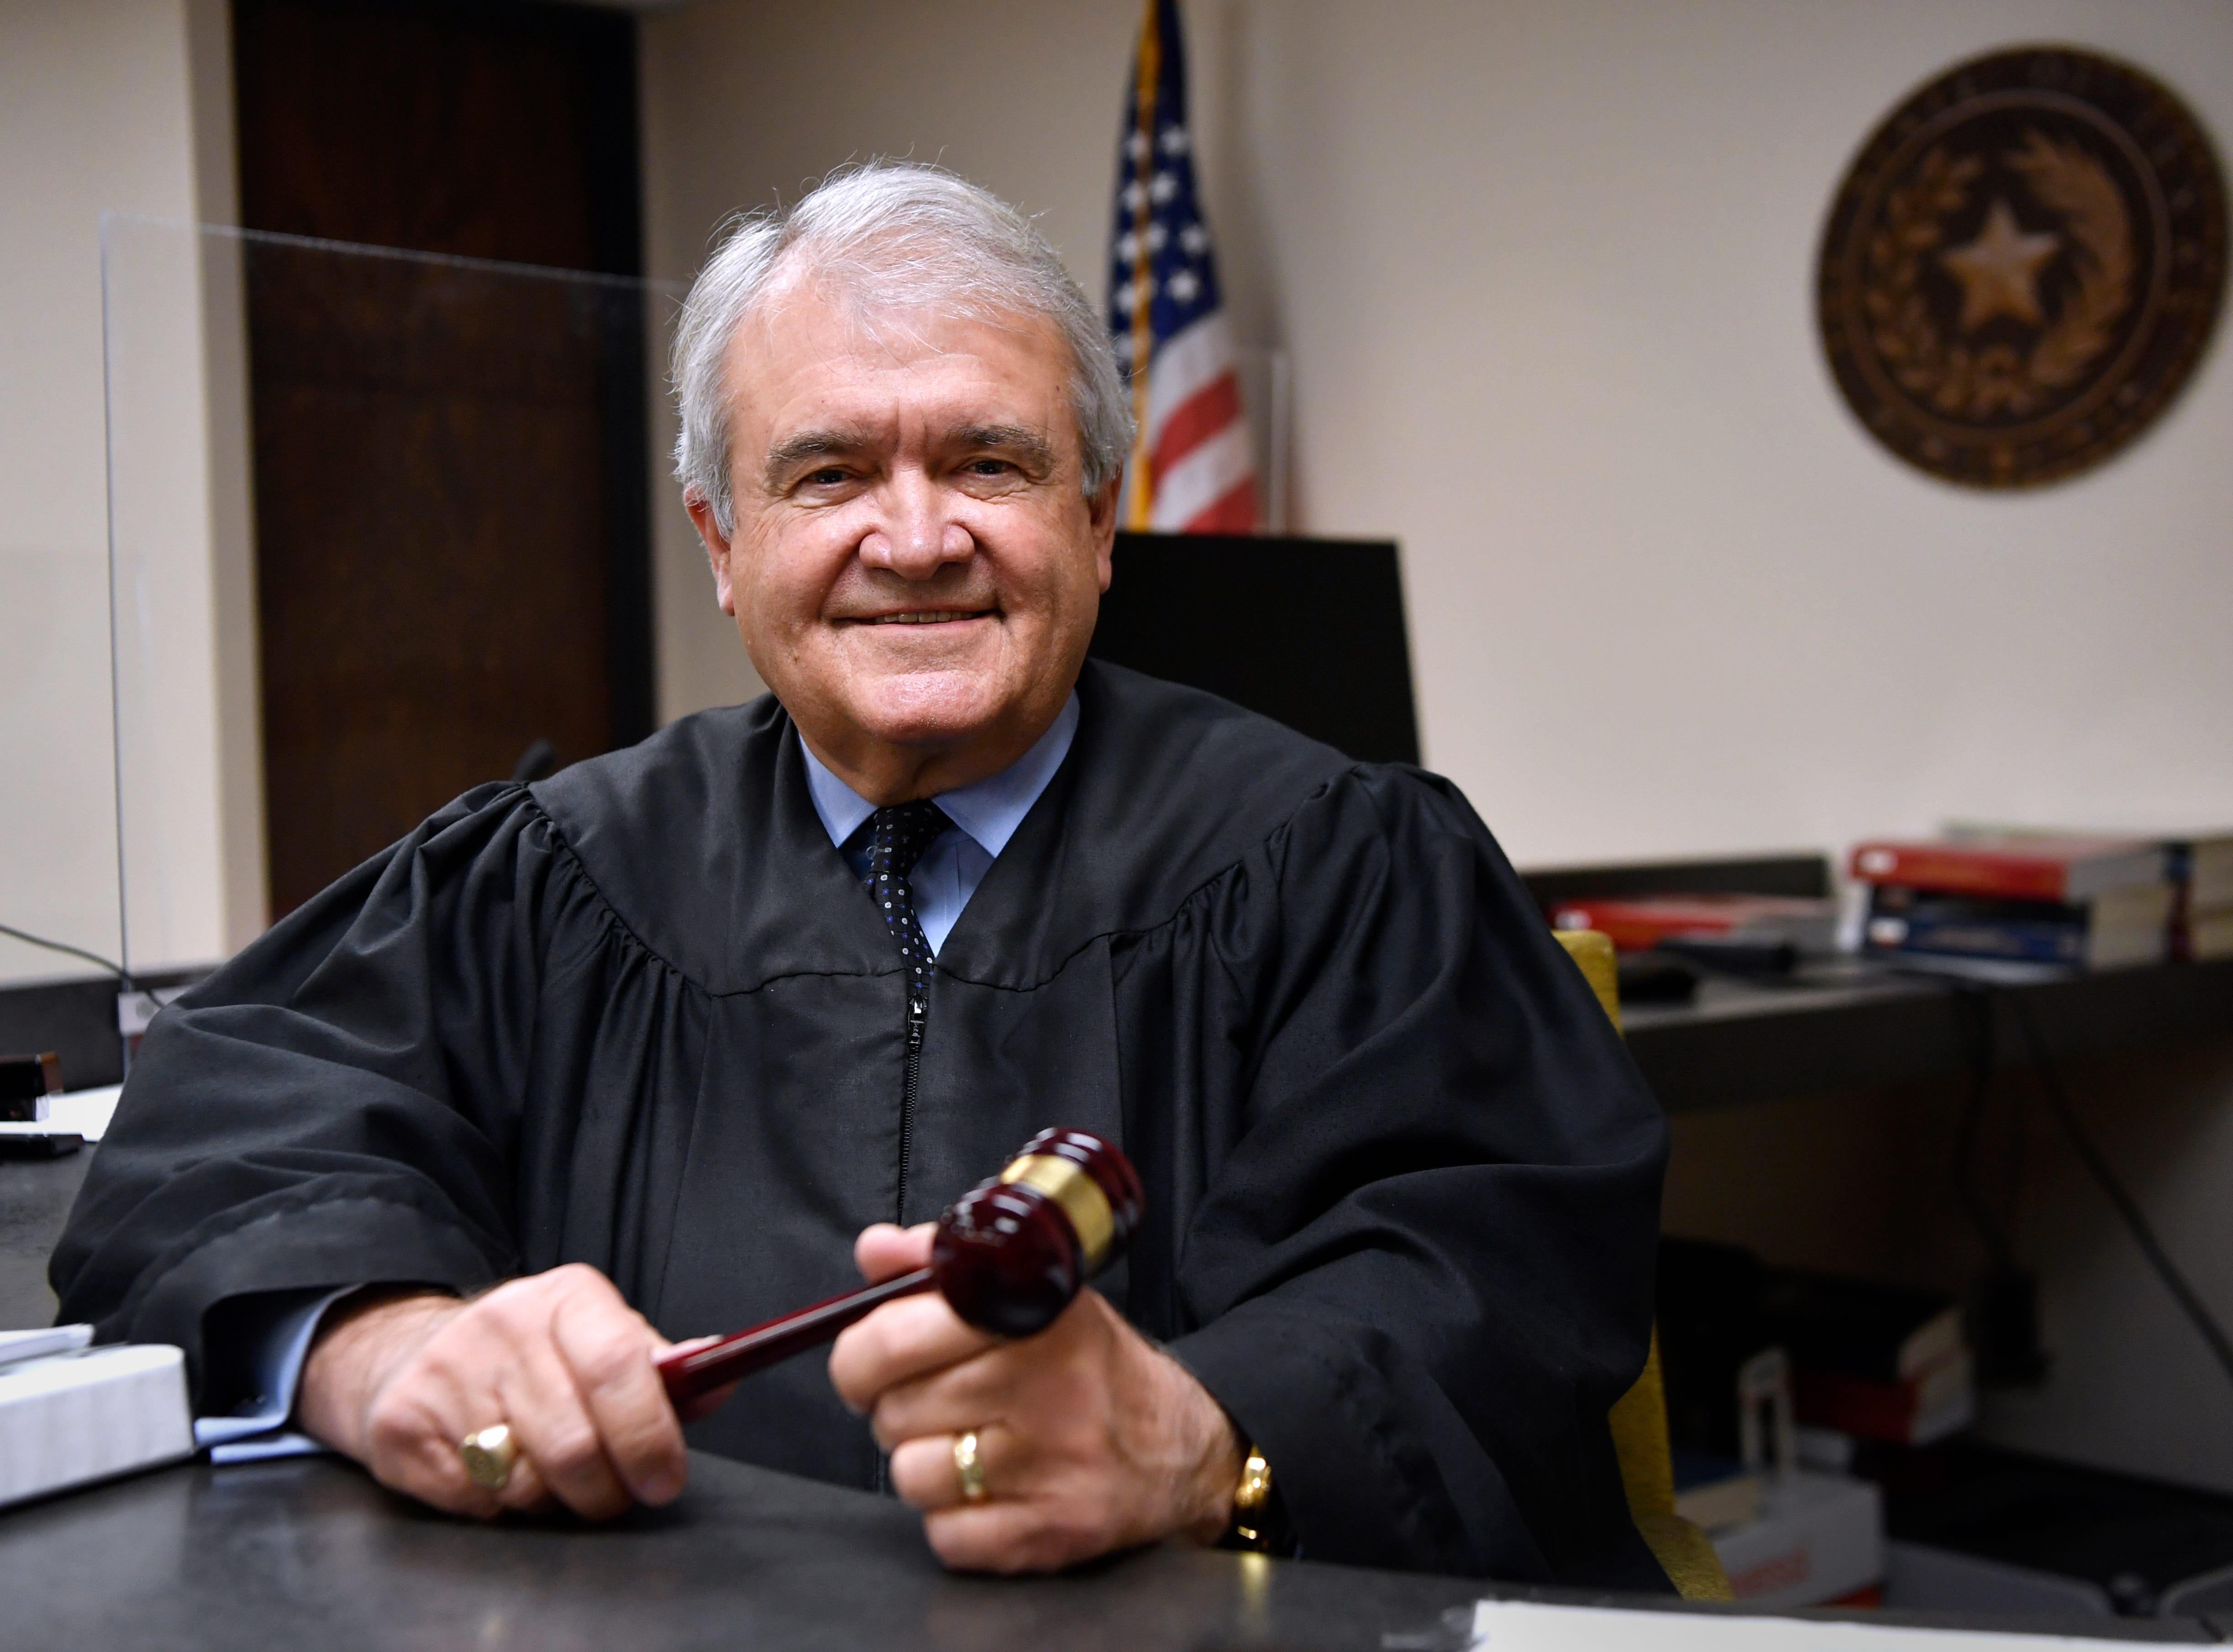 Retiring Judge Lee Hamilton earned respect in his dual roles